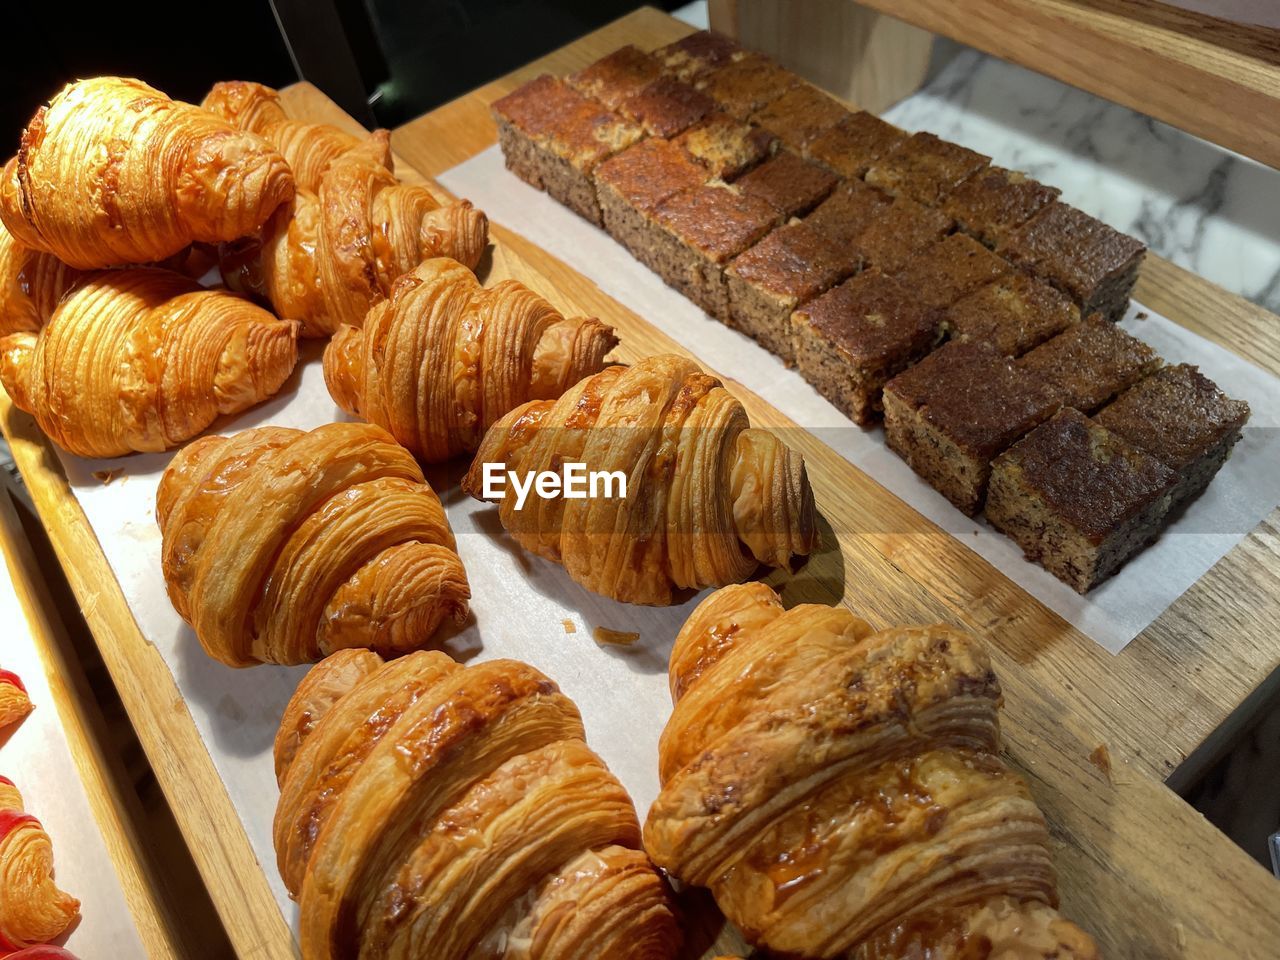 Close up group of fresh baked croissants, super delicious warm fresh buttery croissants and rolls